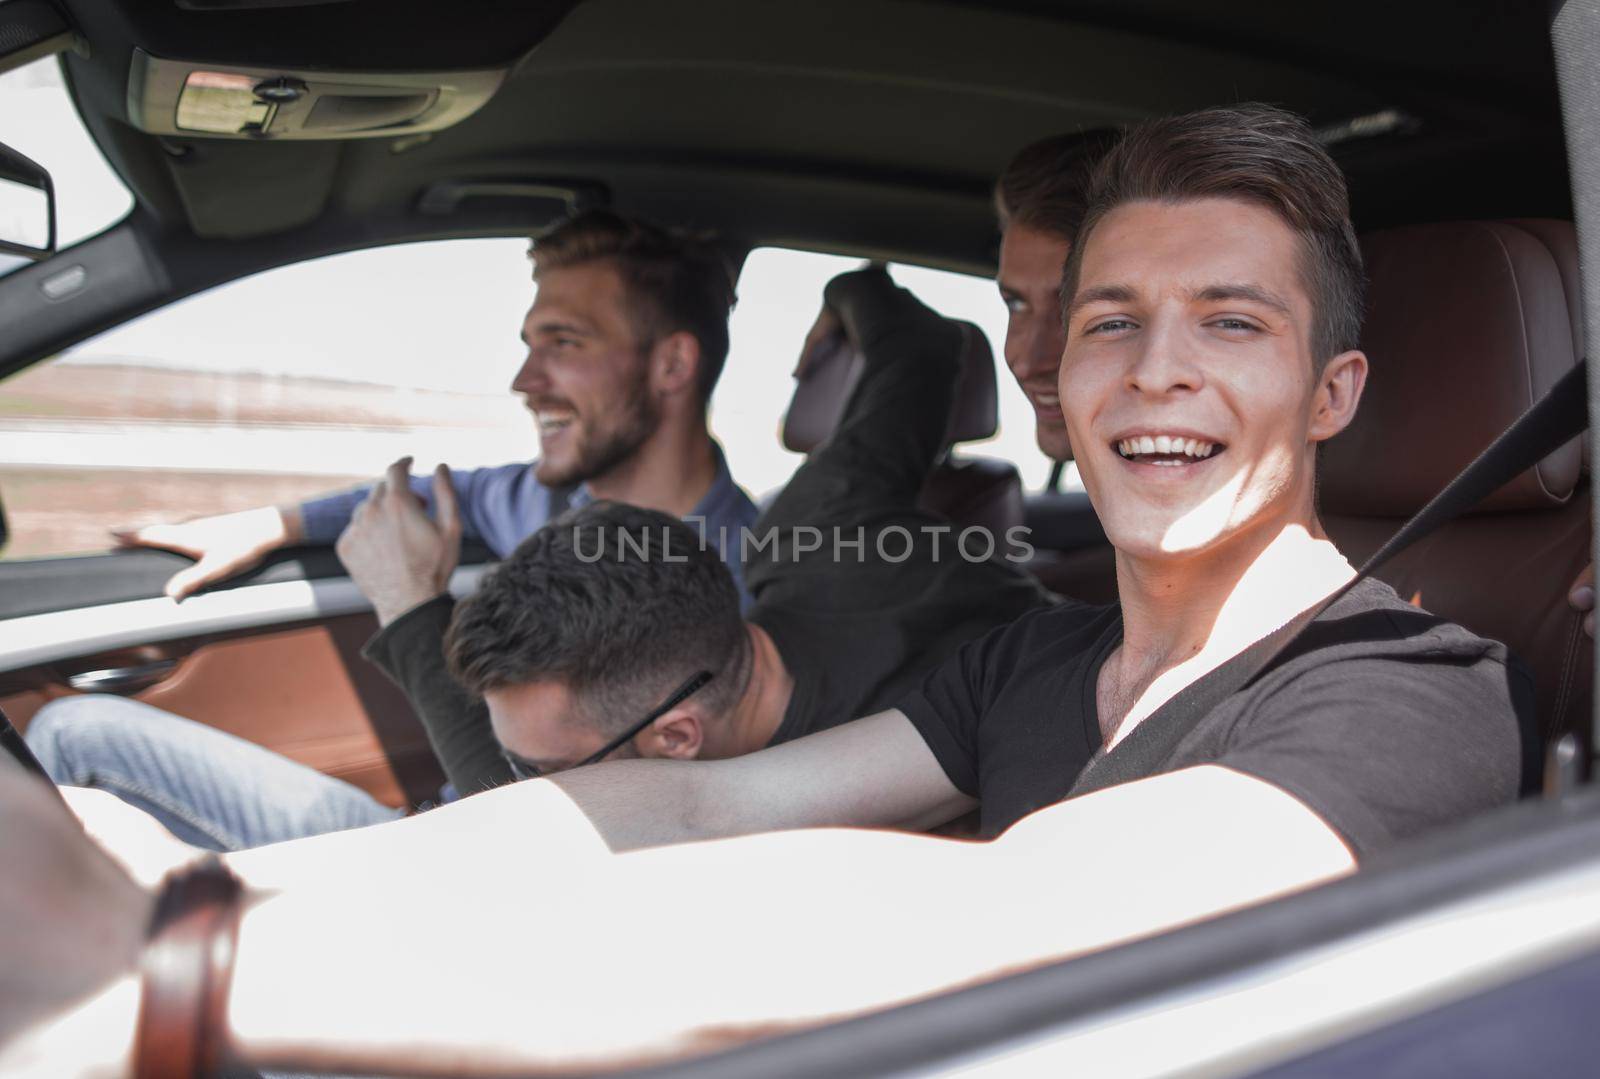 a group of boys rides and looks directly at the car by asdf